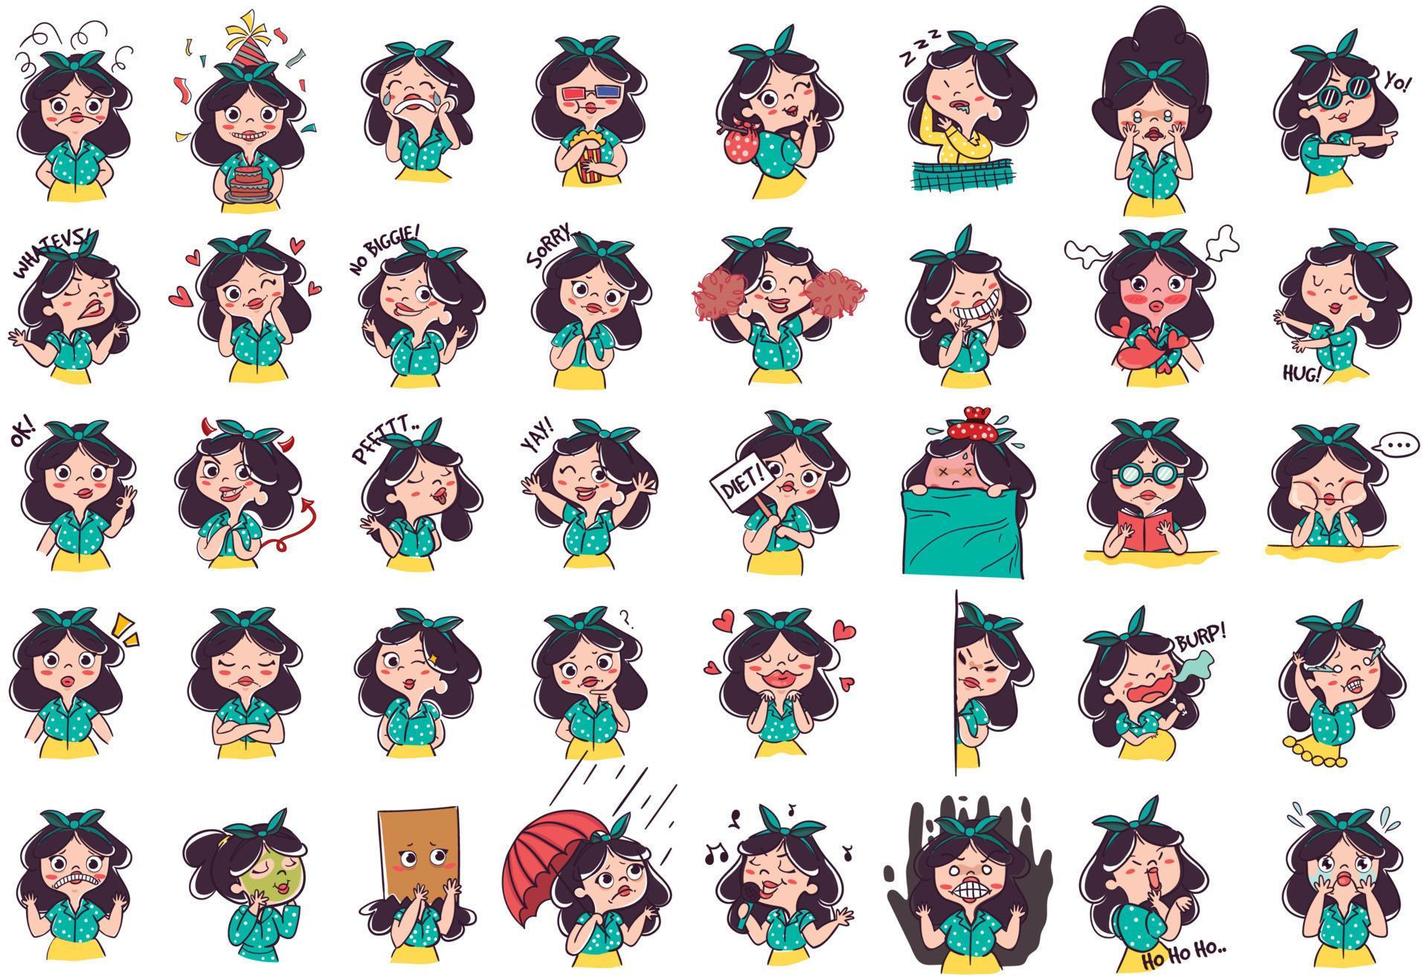 Cute Cartoon Girl Expressions Pack illustration vector